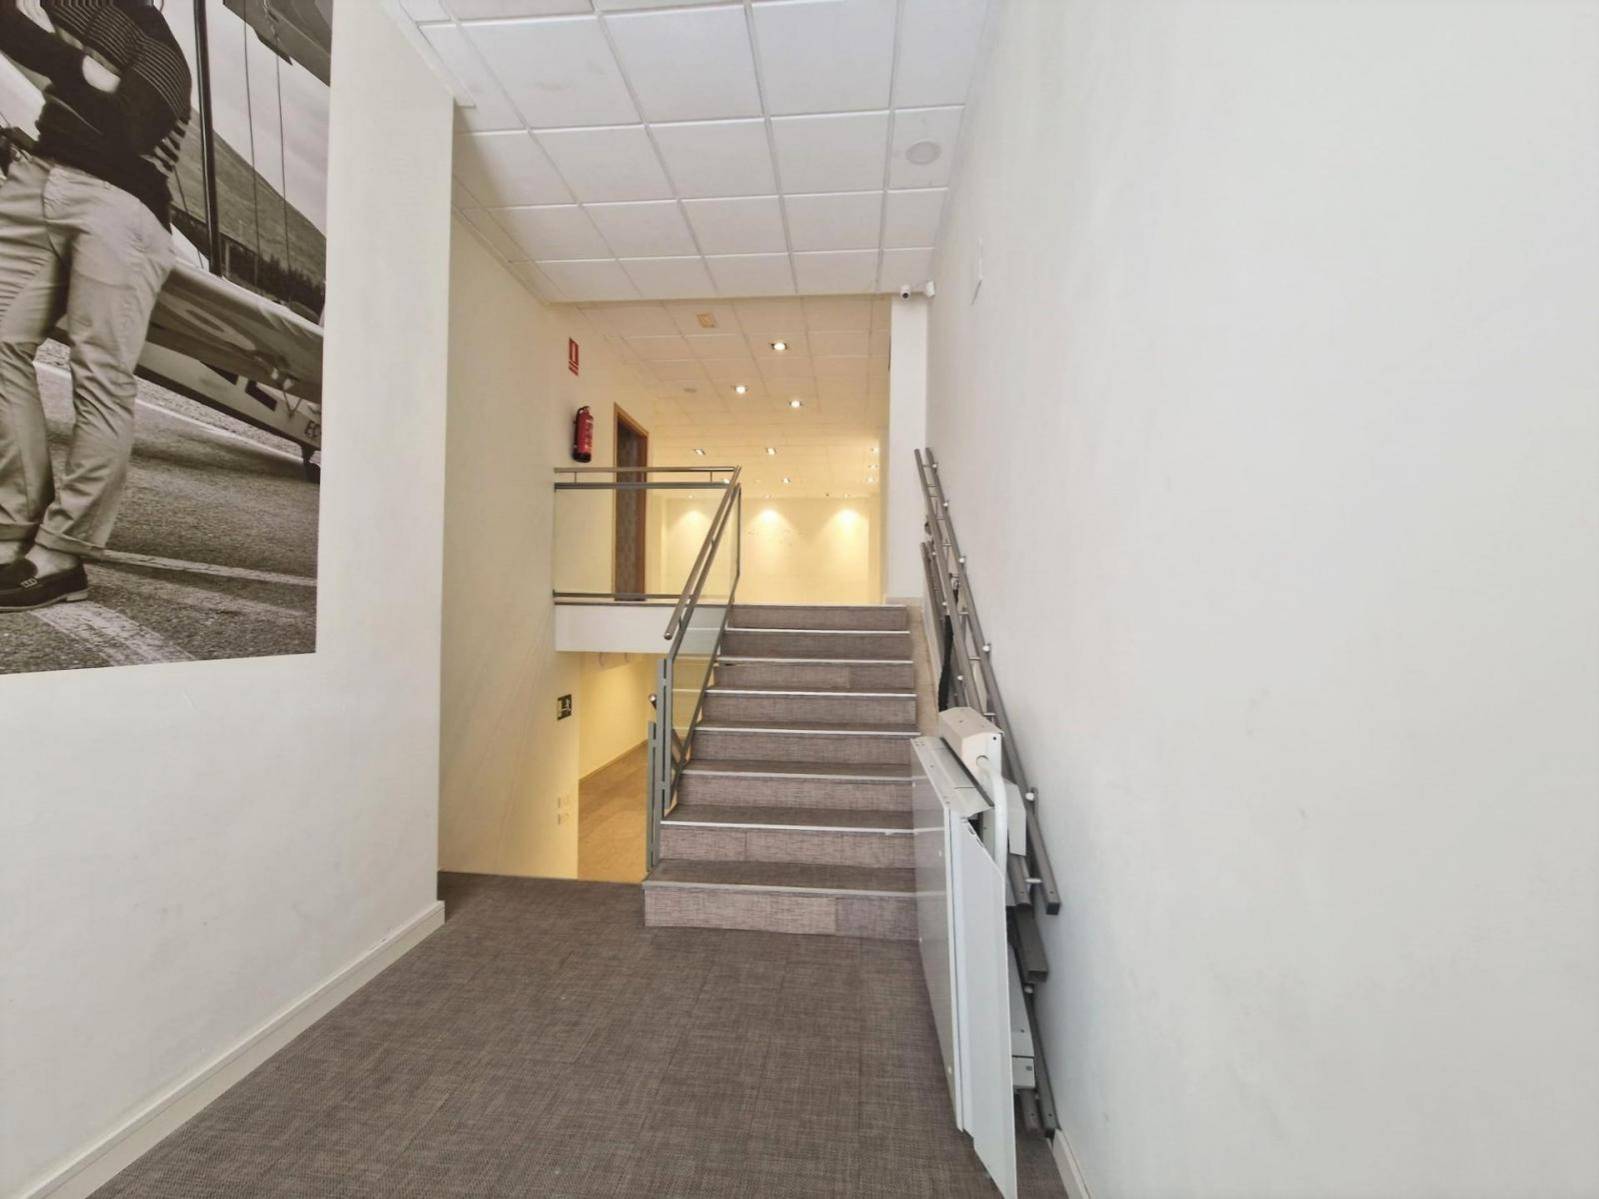 LARGE COMMERCIAL PREMISES WITH THREE FLOORS IN THE CENTER OF GUARDAMAR DEL SEGURA